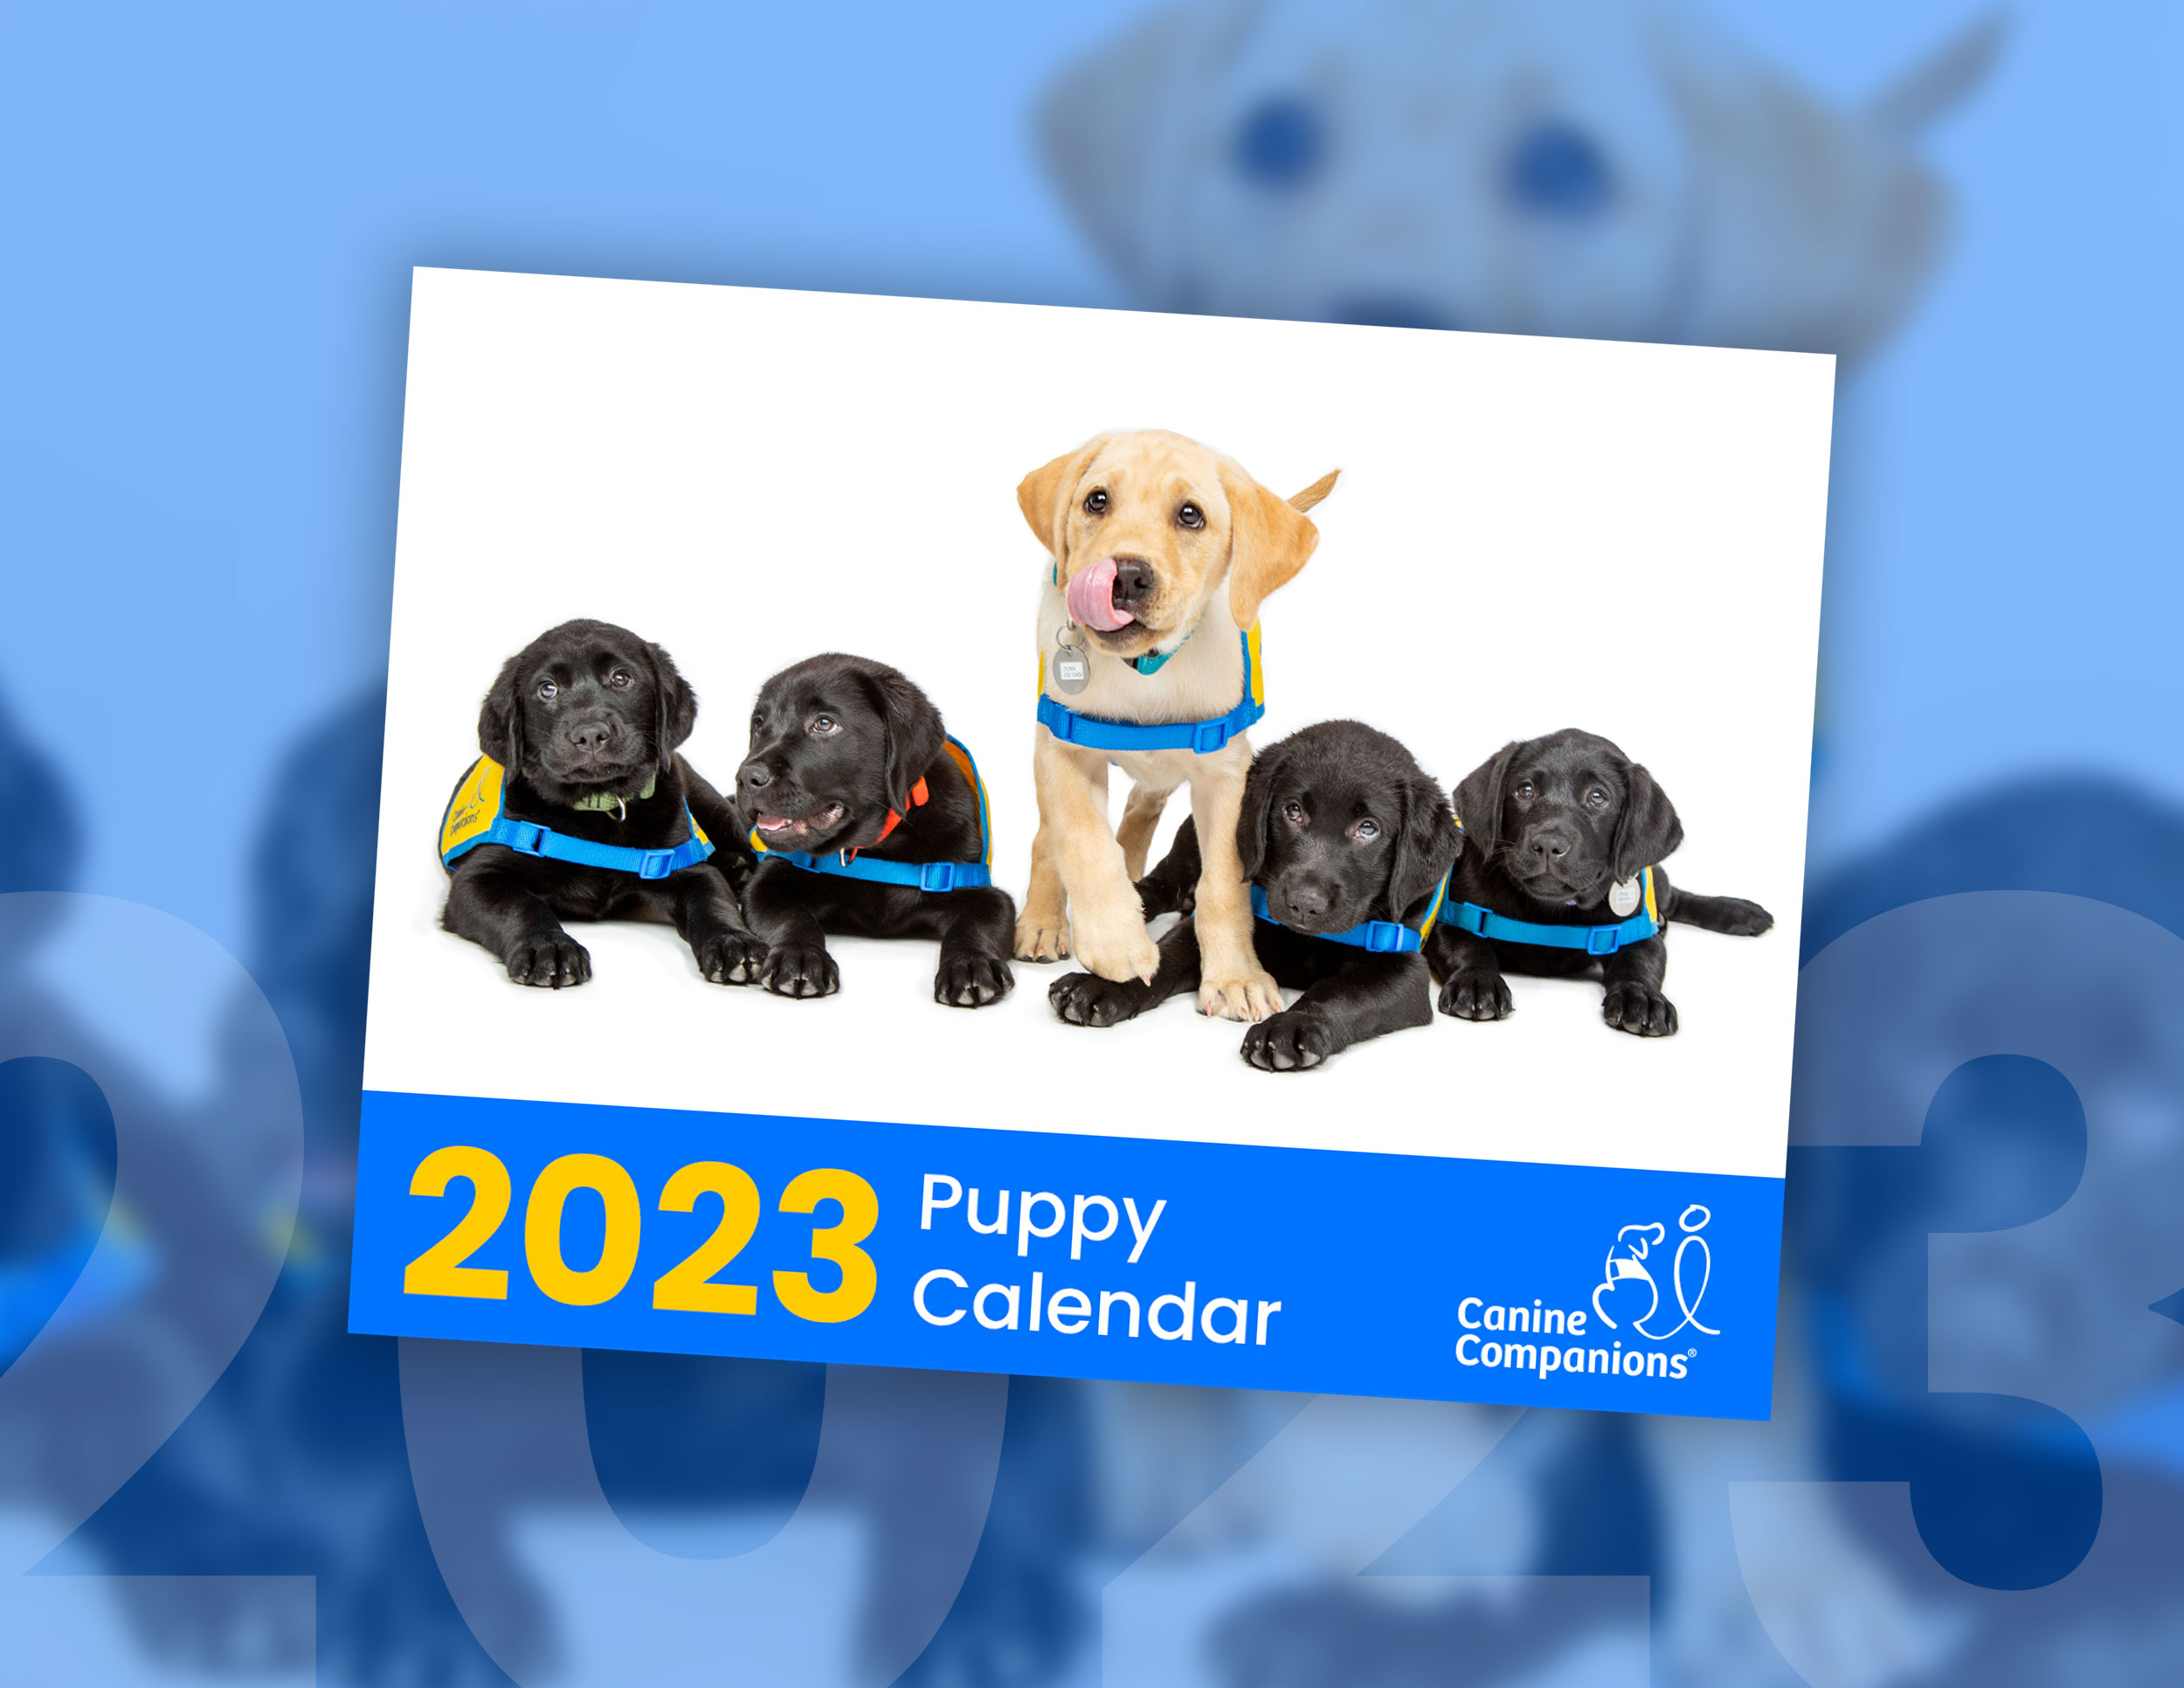 Image of the 2023 Puppy Calendar with a row of puppies in yellow puppy vests superimposed on a blue background with the text 2023 Puppy Calendar